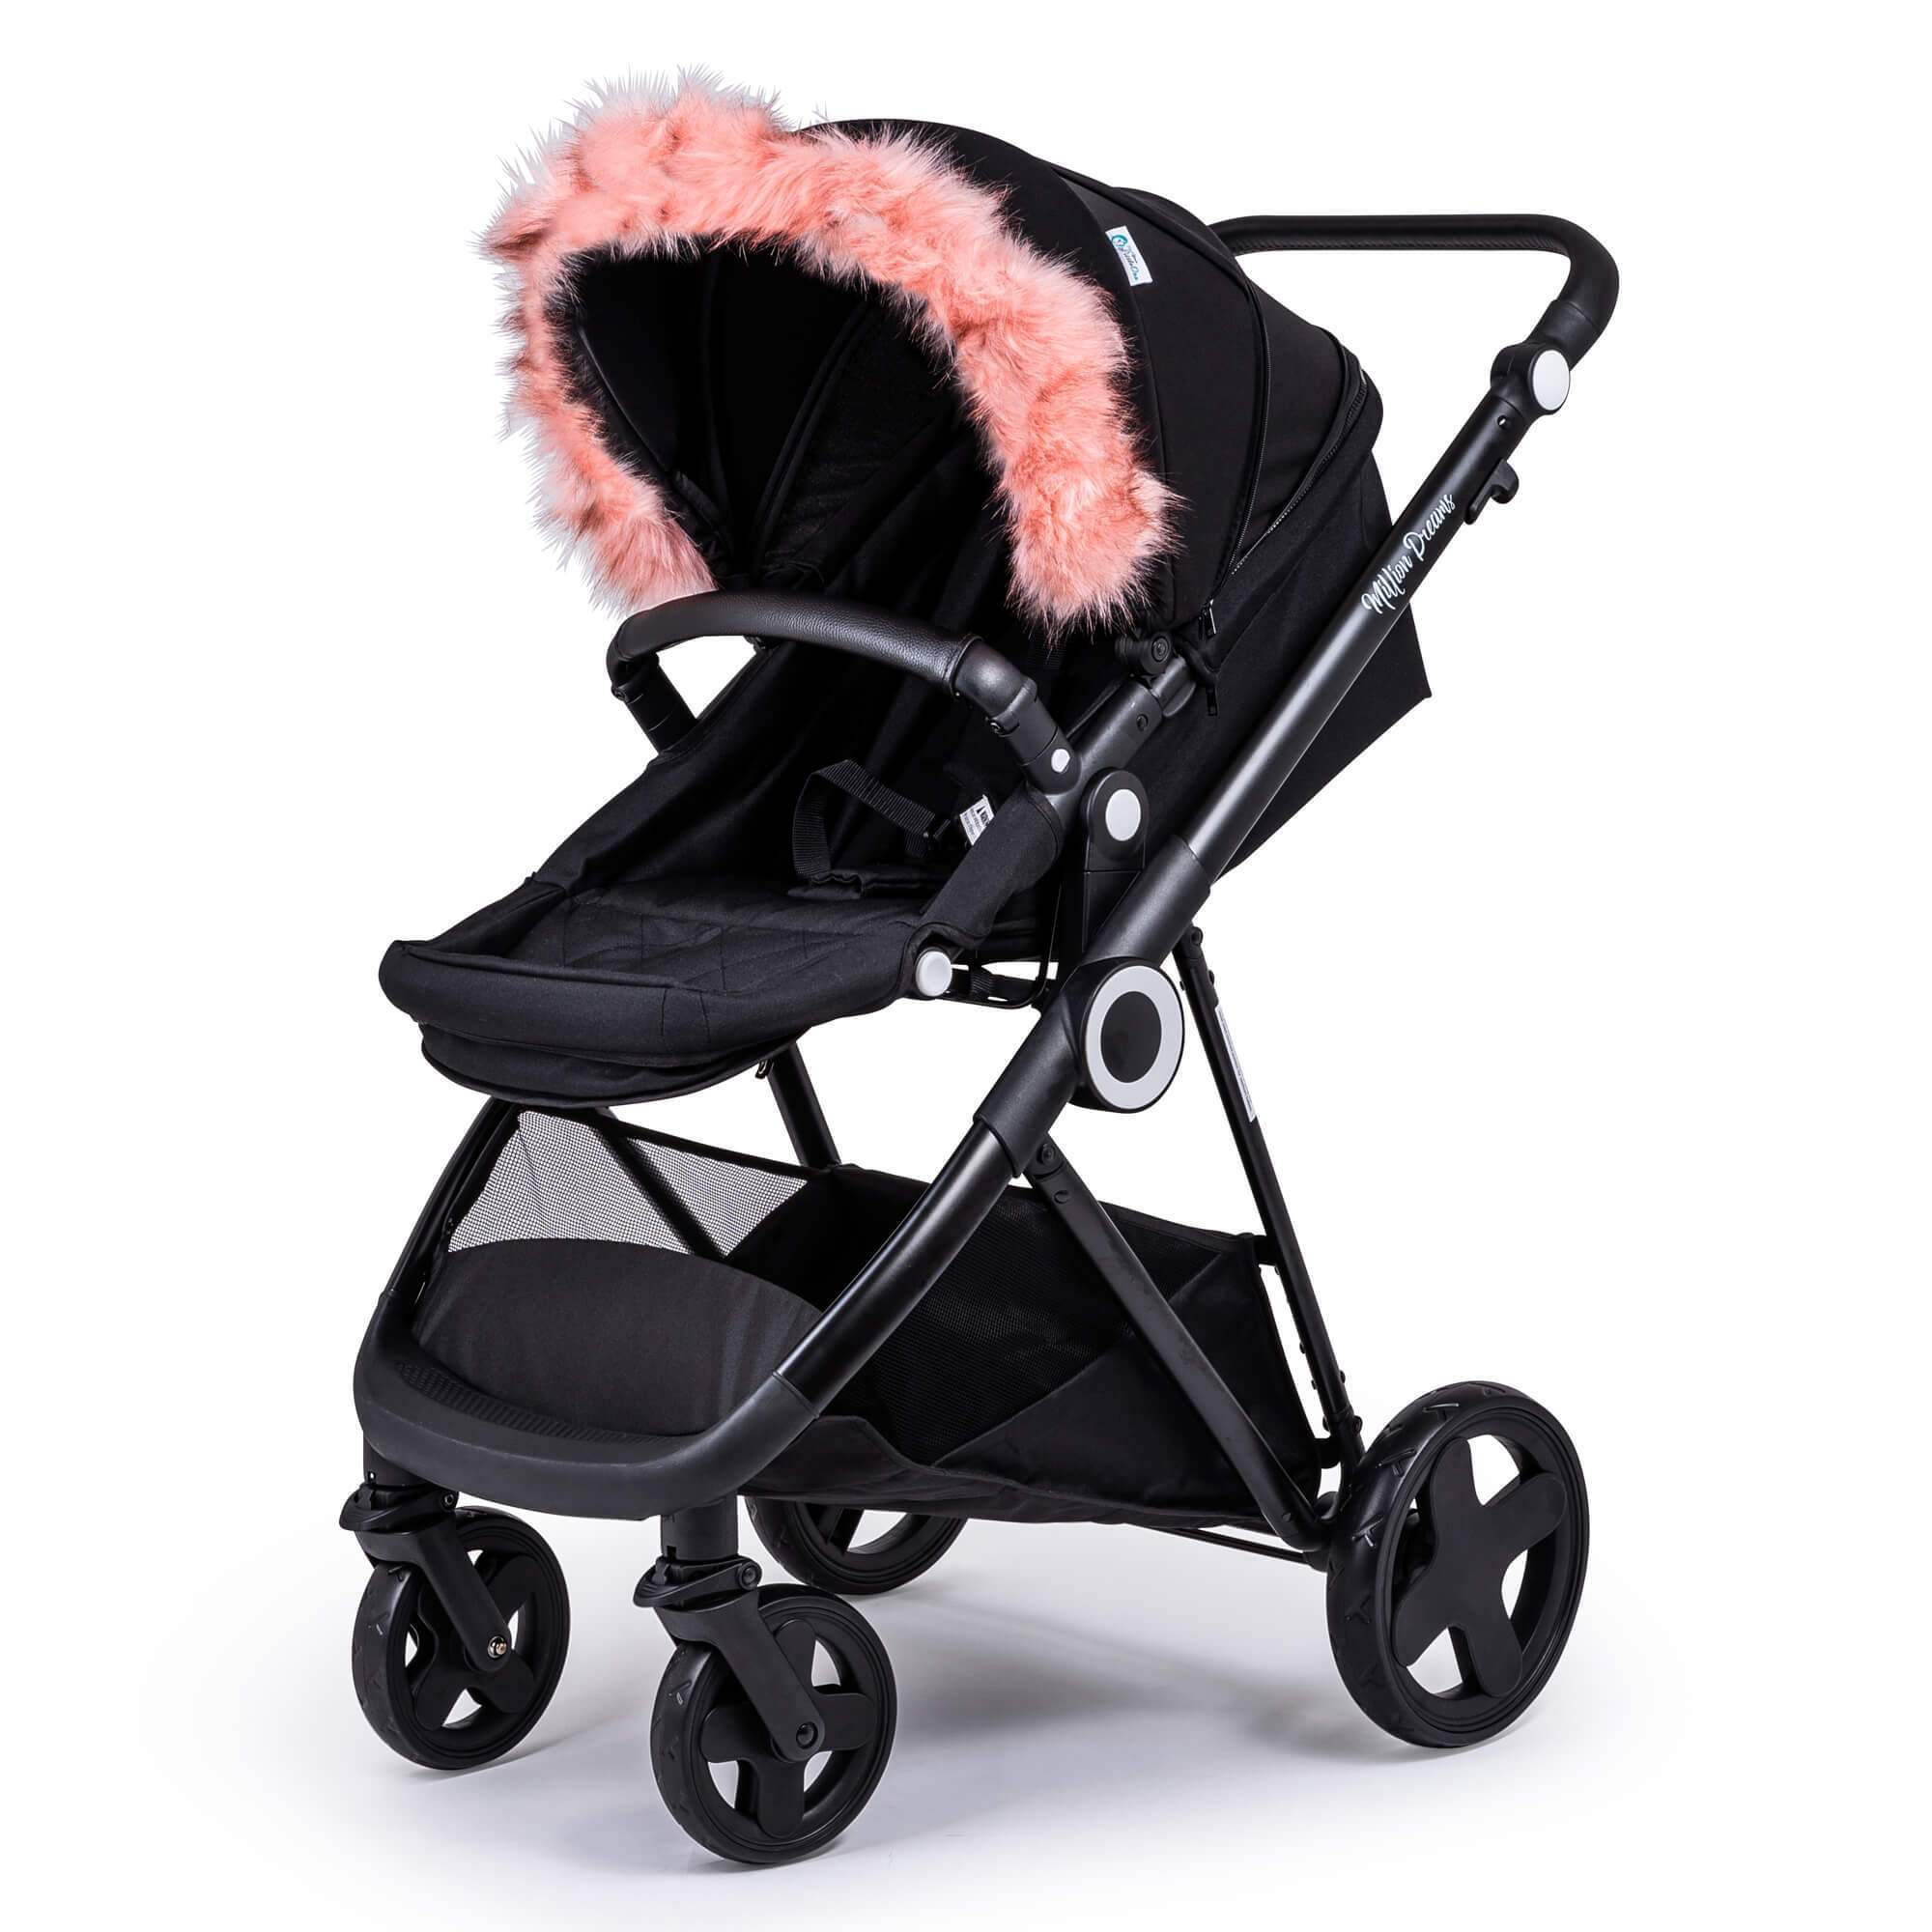 Pram Fur Hood Trim Attachment For Pushchair Compatible with Gb - Pink / Fits All Models | For Your Little One